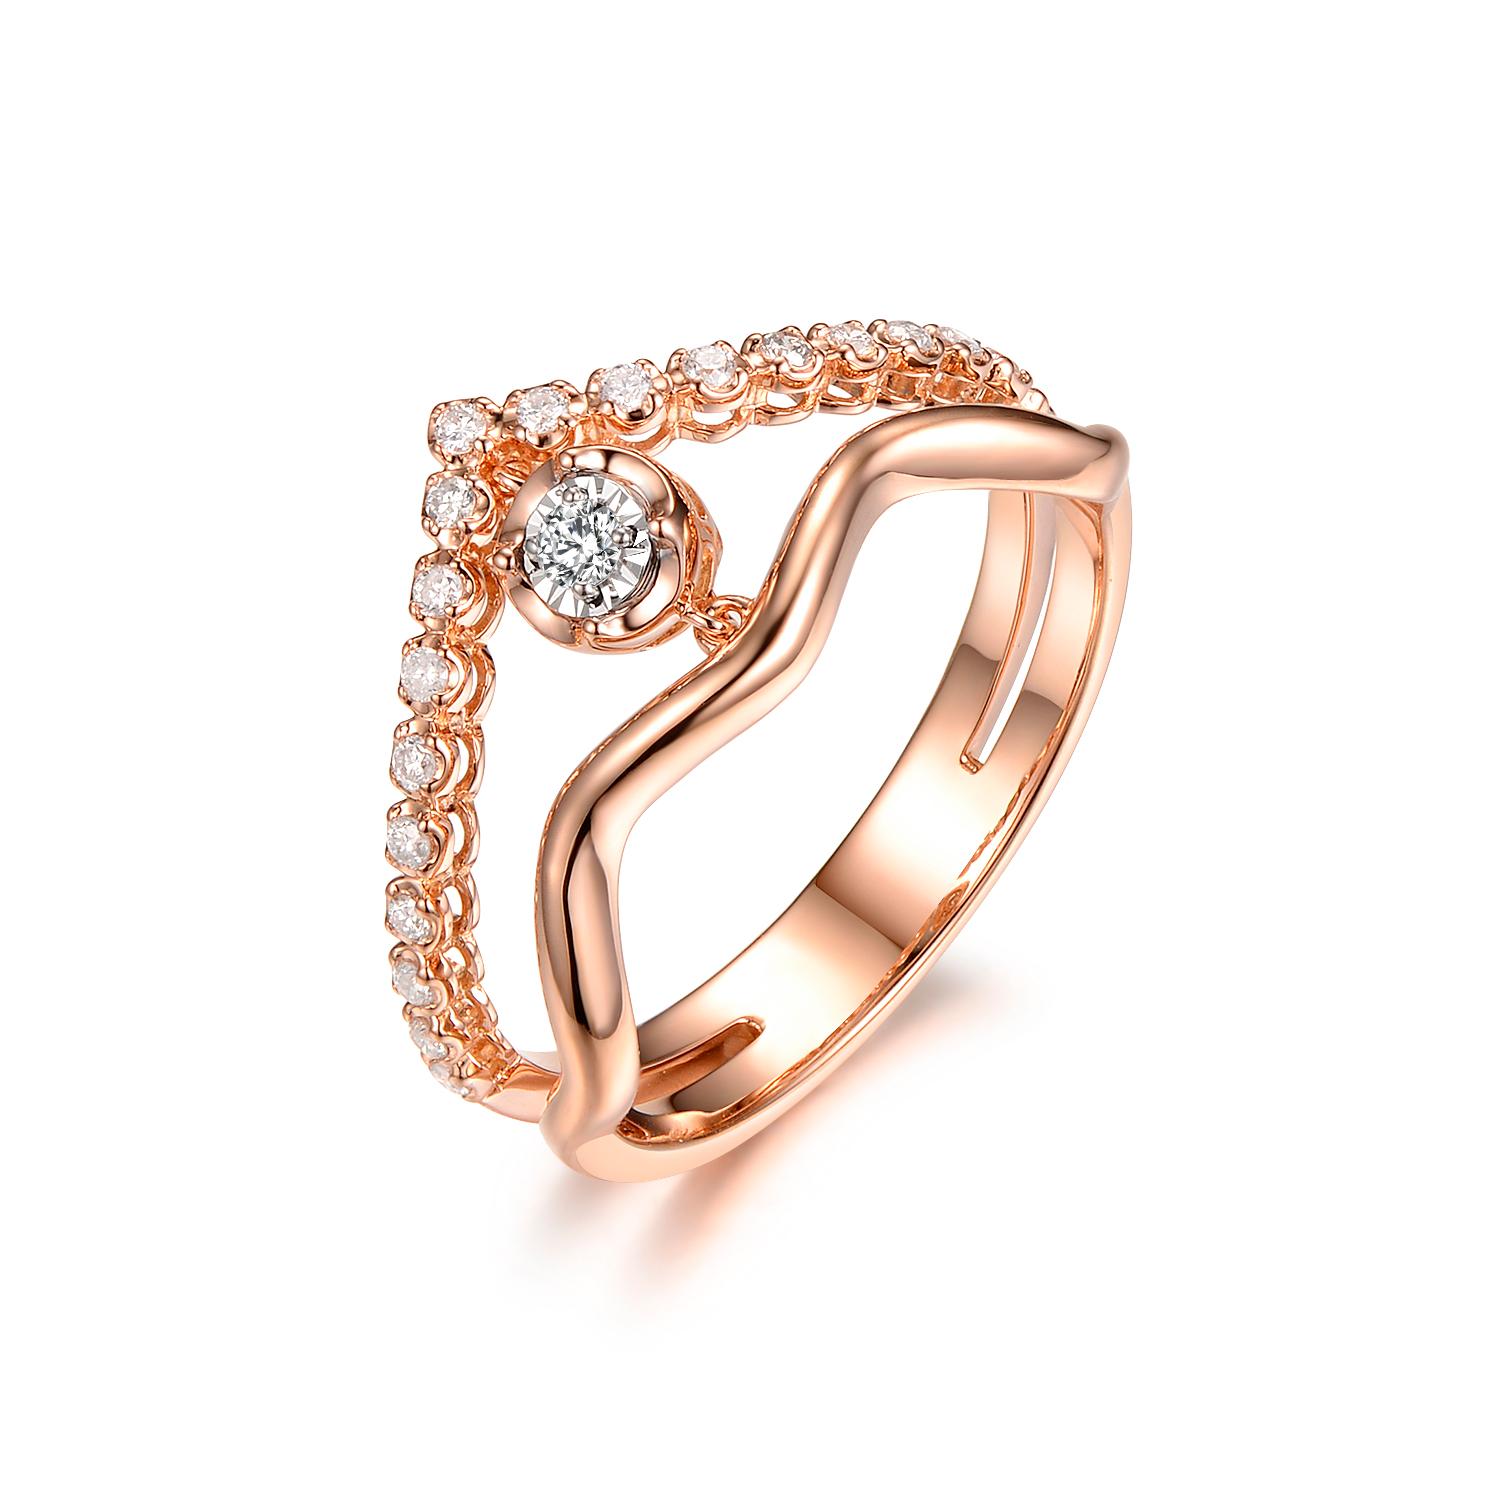 This ring is a contemporary masterpiece, artfully crafted in 18K rose gold. It features a central diamond weighing 0.16 carats, set amidst a captivating design that is both modern and timeless.

The central diamond is a beacon of brilliance,